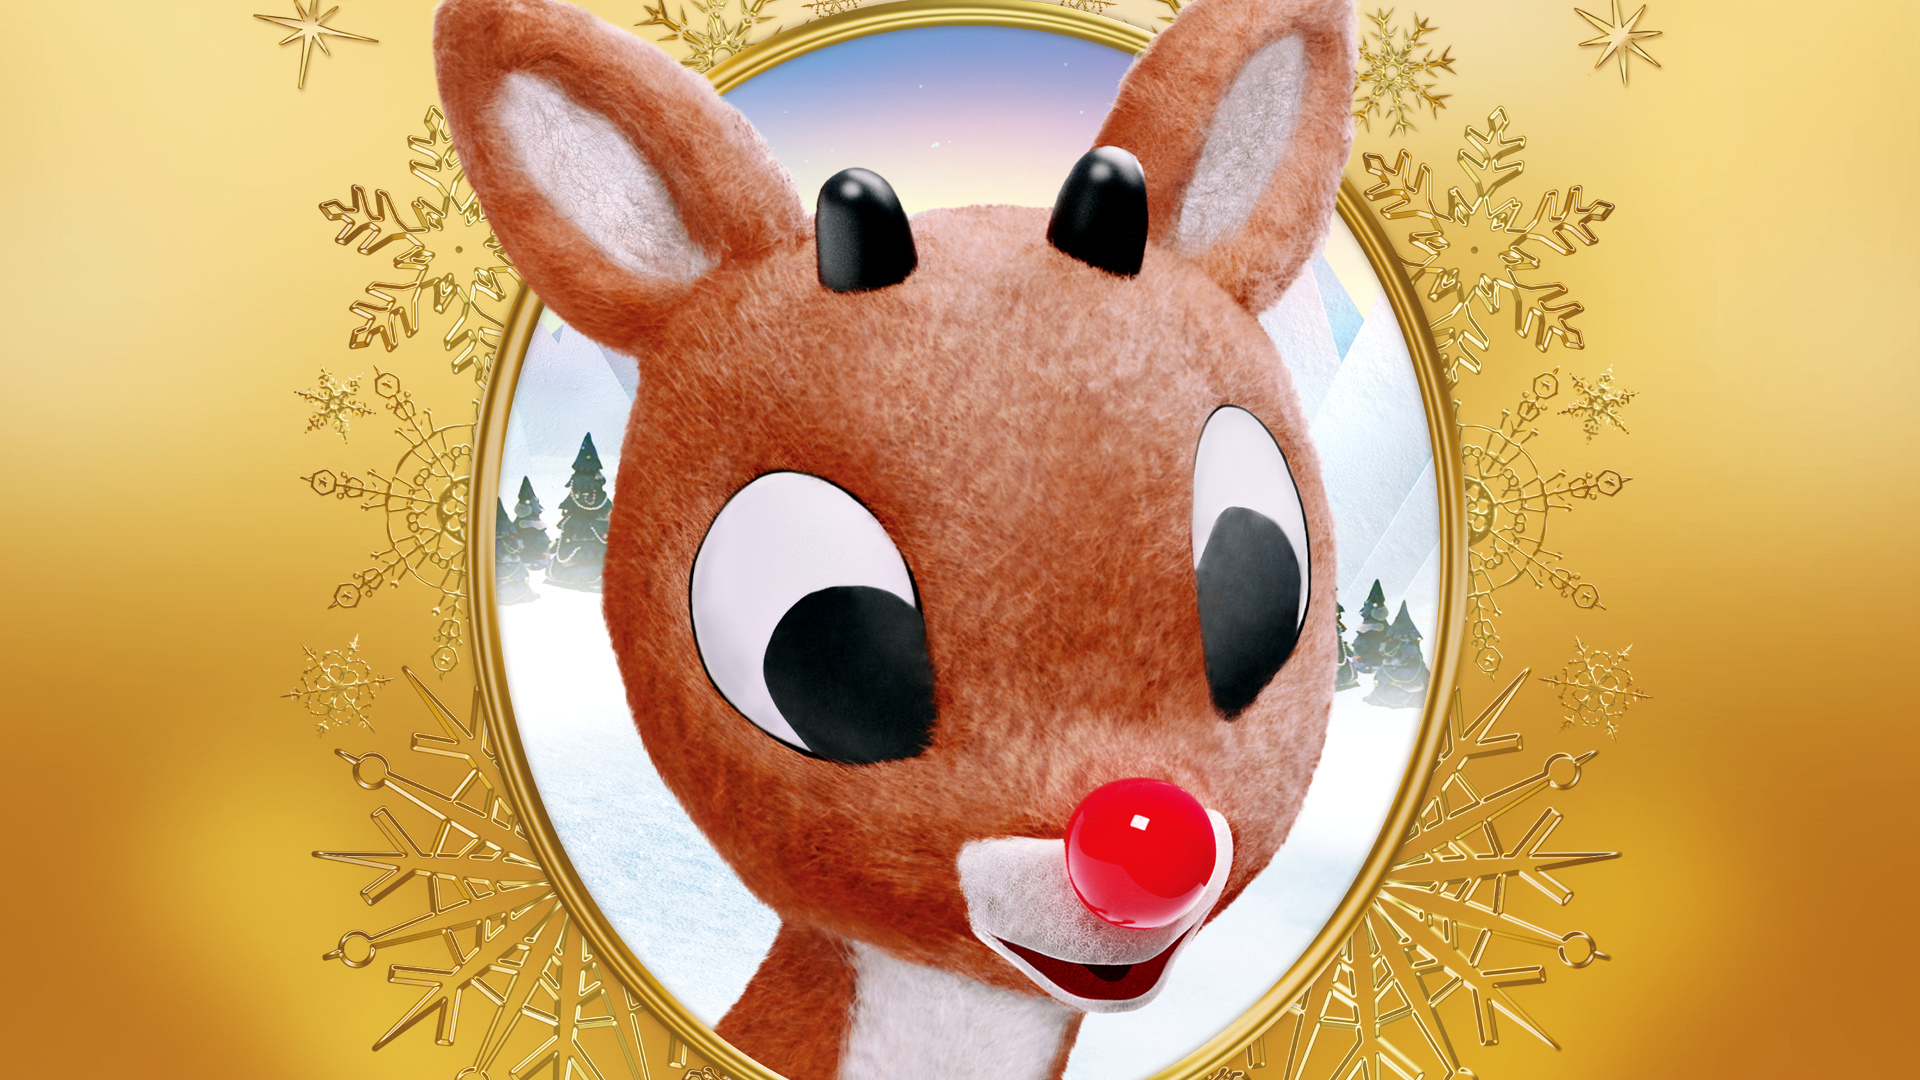 1920x1080 Rudolph The Red-Nosed Reindeer HD Wallpaper